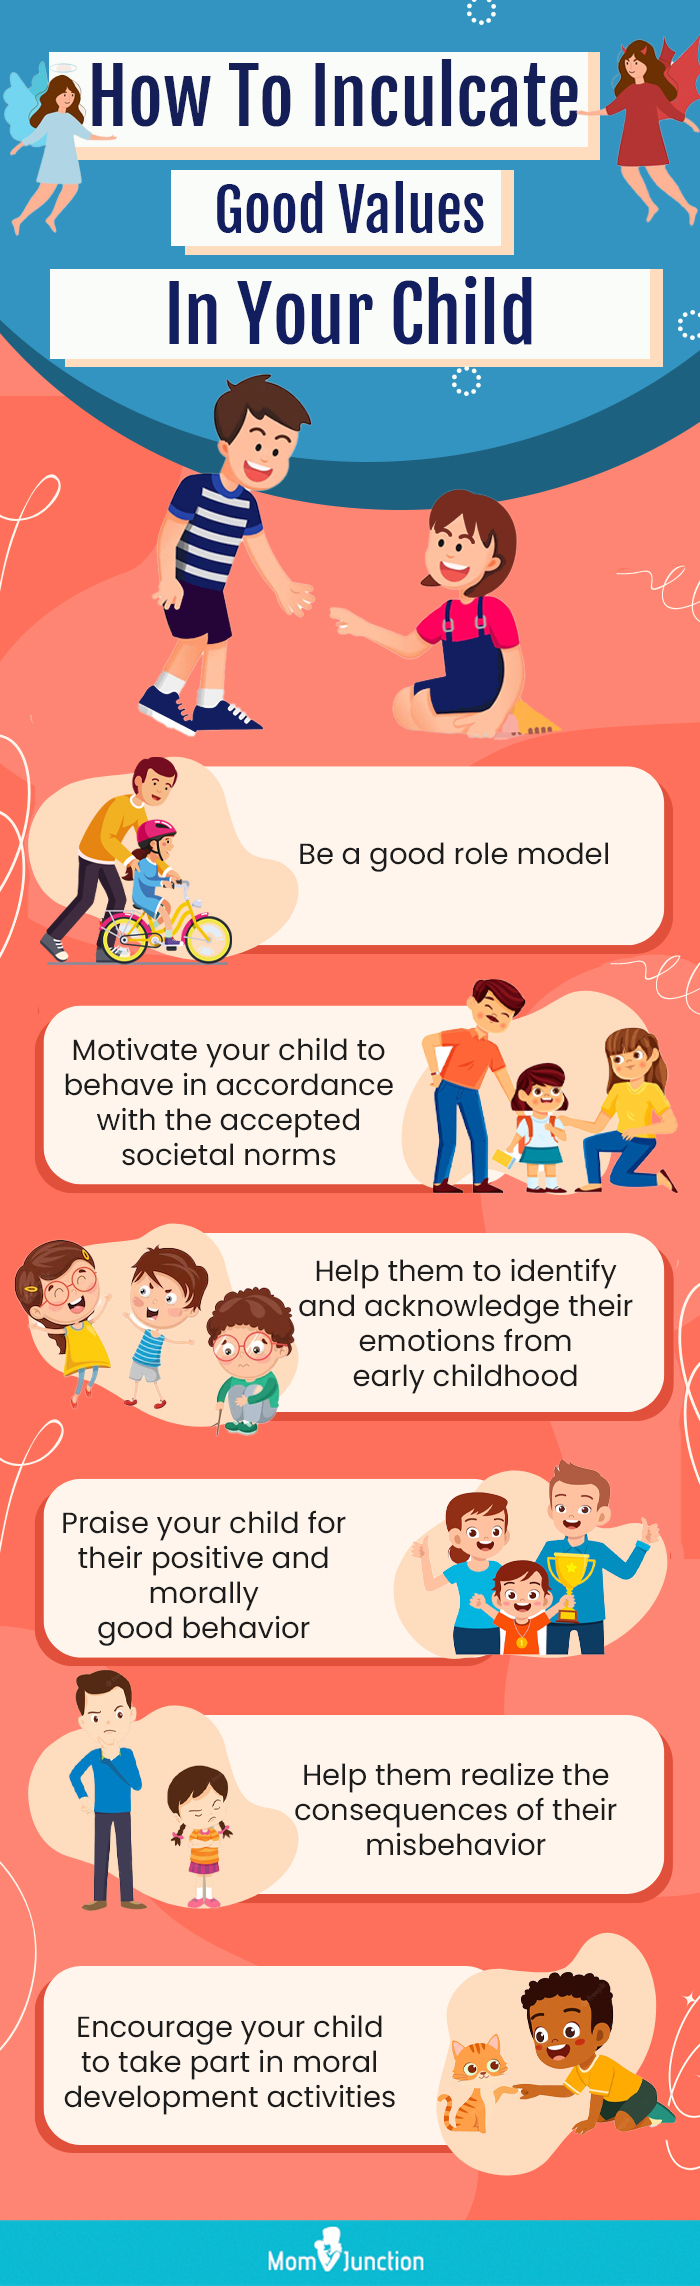 how to inculcate good values in your child (infographic)